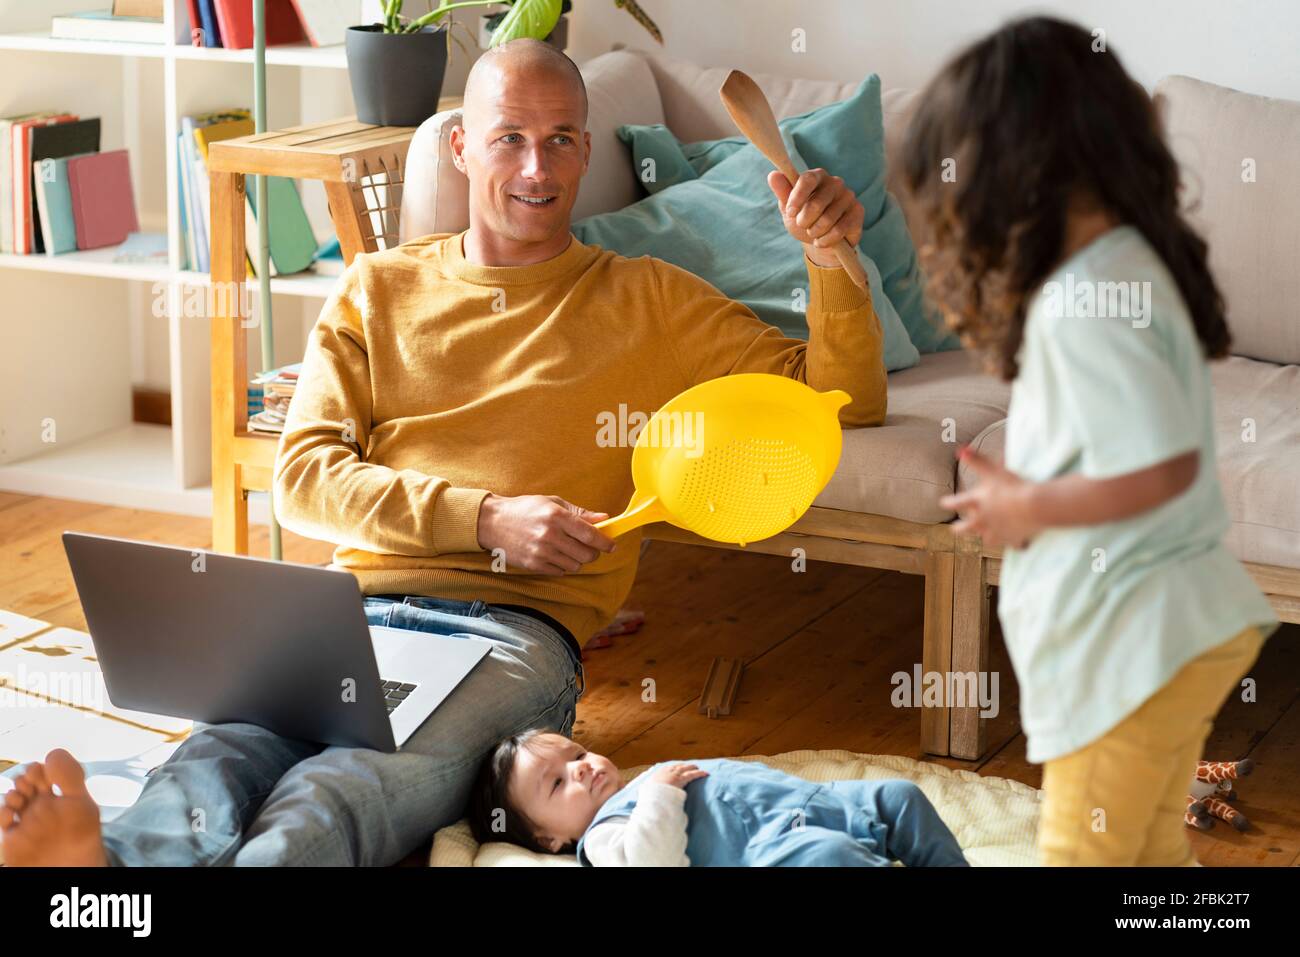 https://c8.alamy.com/comp/2FBK2T7/father-and-daughter-playing-with-kitchen-tools-while-baby-lying-at-home-2FBK2T7.jpg